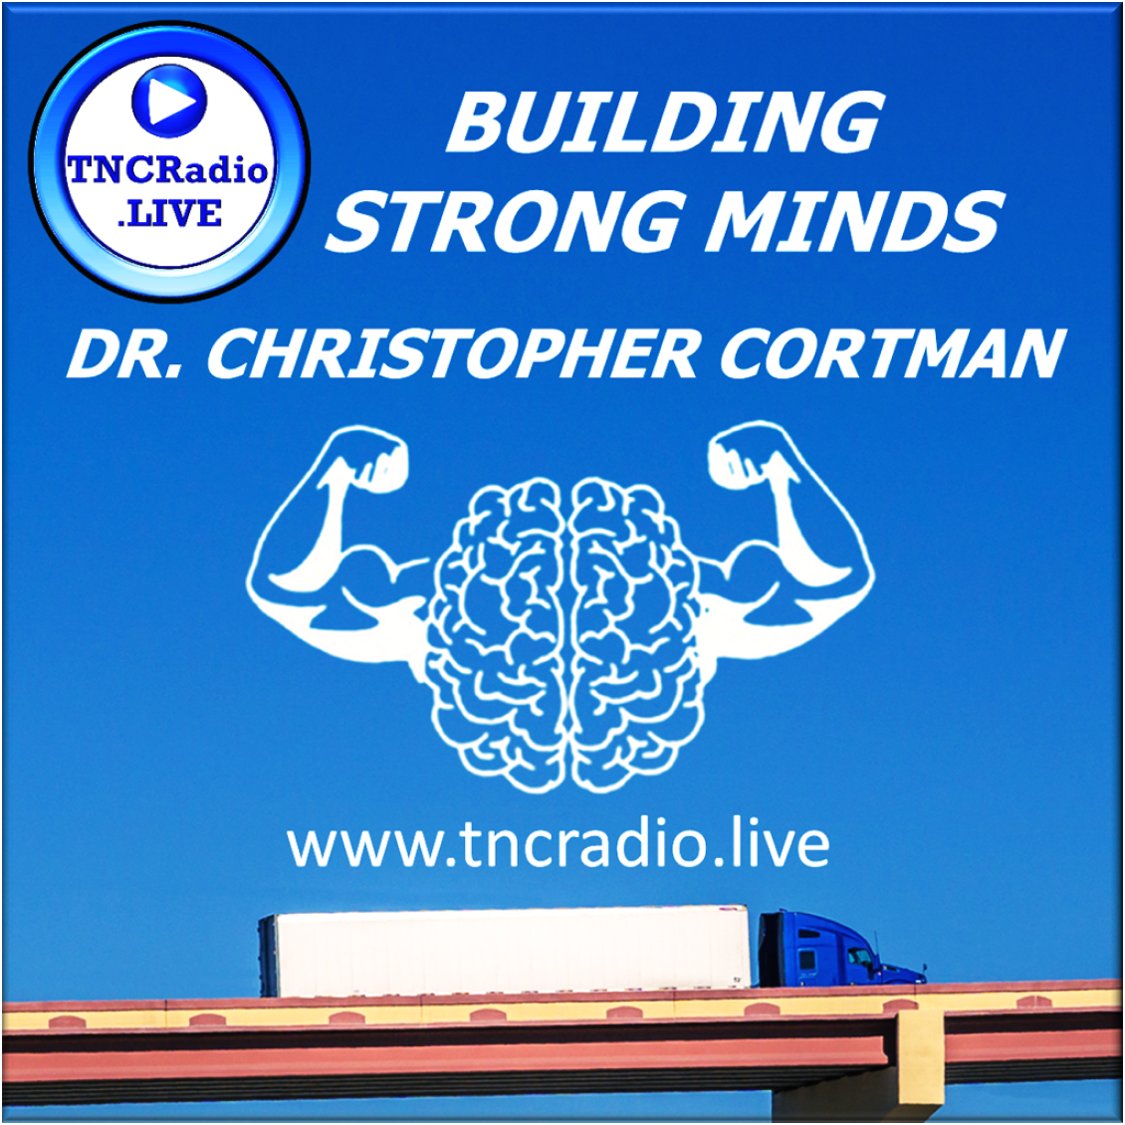 “Building Strong Minds” Staying mentally fit is as important to a driver as physical fitness. Get the tools you need to be successful on the road.  Mon 7PM ET TNCRadio.LIVE
#Truckers
#Trucking
#TruckDrivers
#CDLEntertainment
#TheUSATruckers